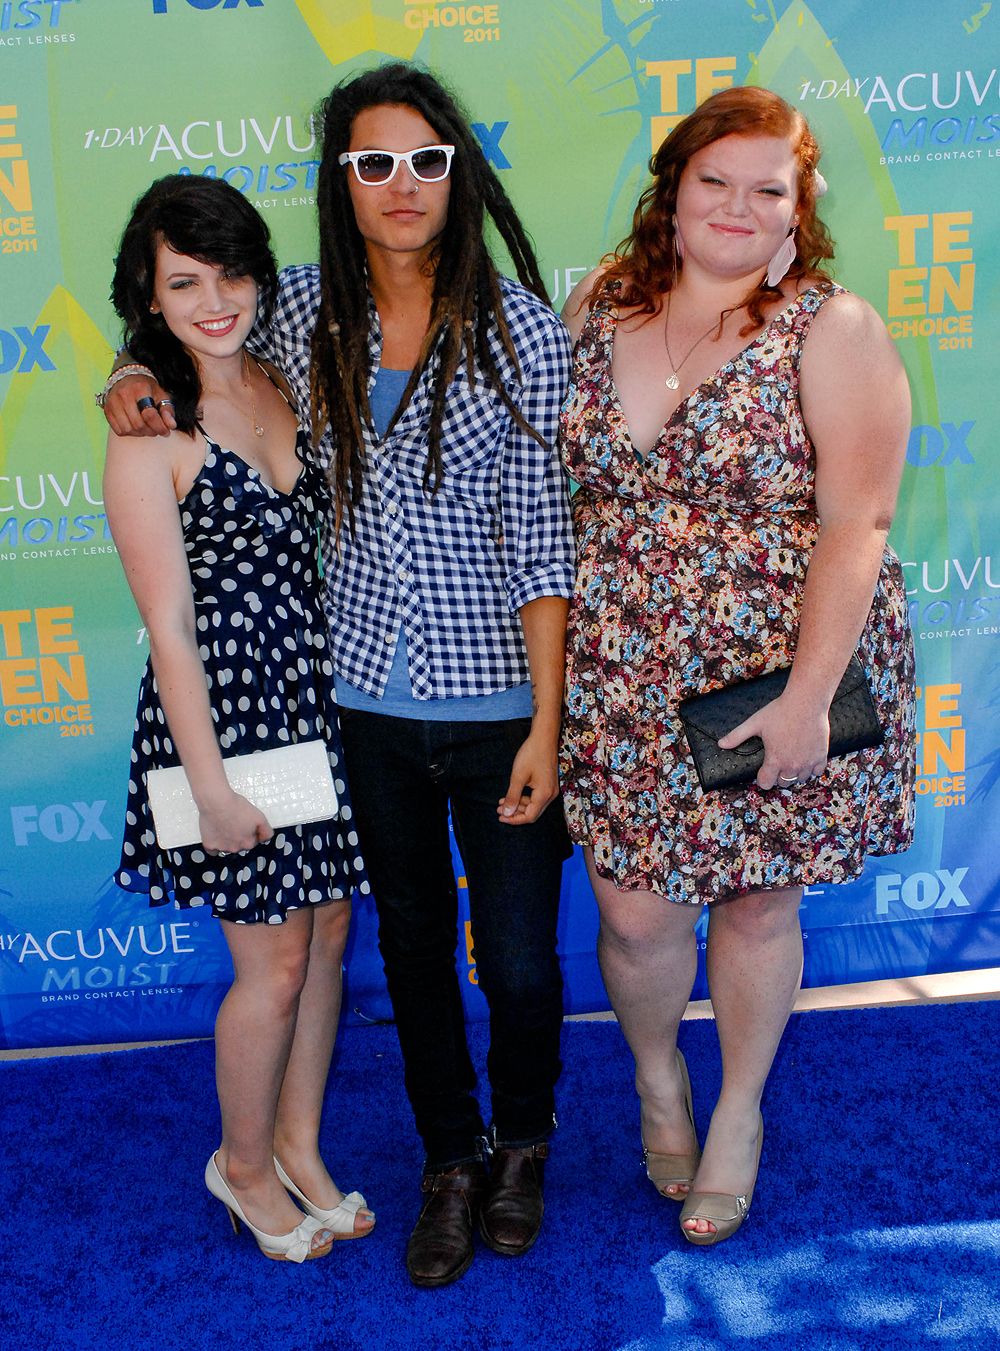 With Lindsay Pearce and Samuel Larsen and the Teen Choice Awards 2011